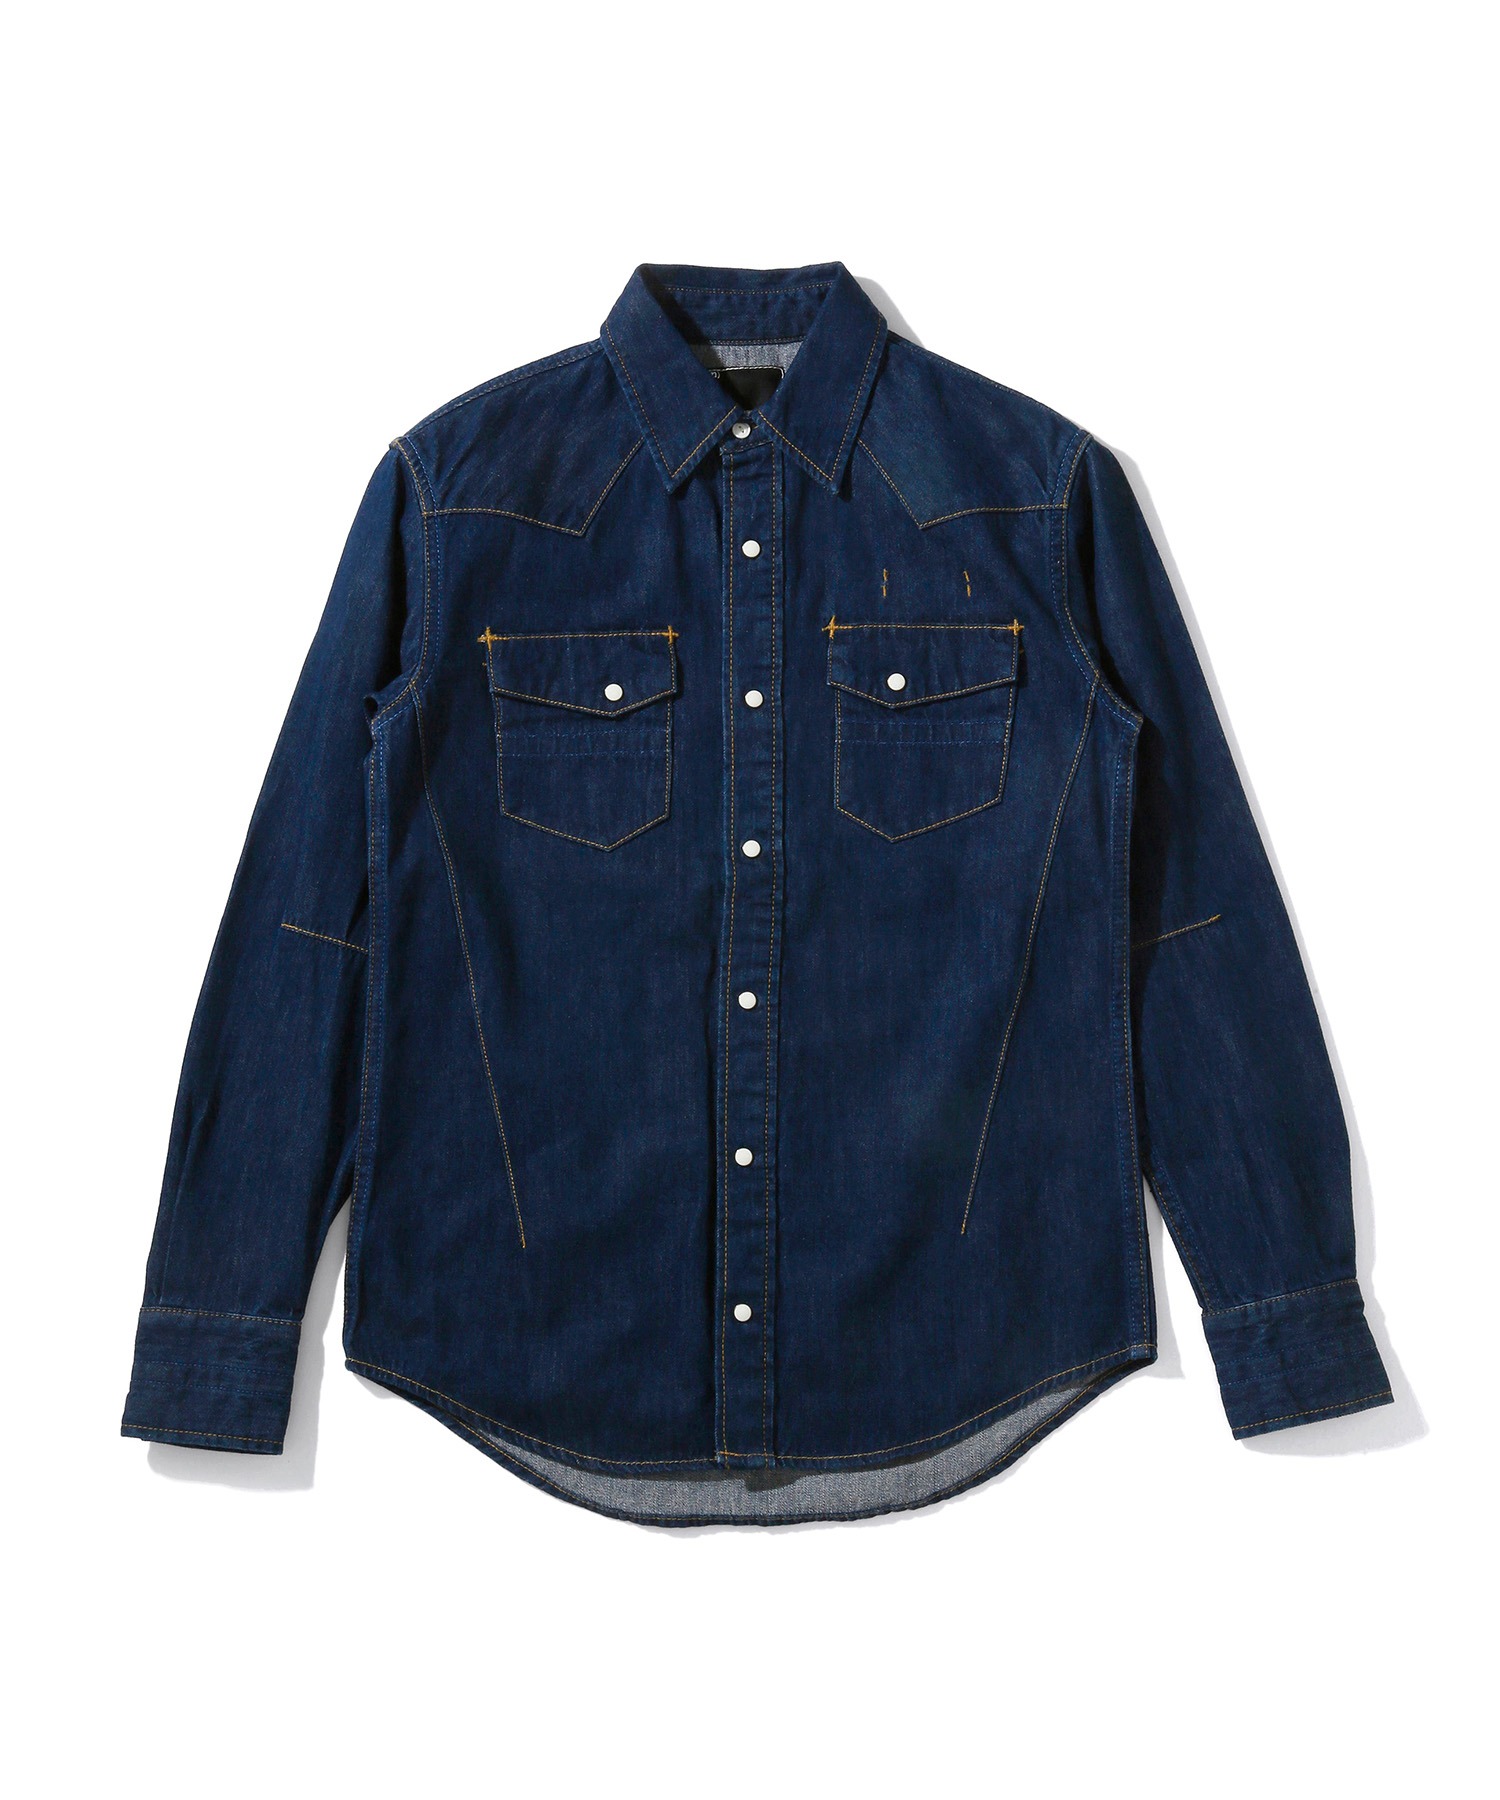 n BY SALE 78%OFF NUMBER N DENIM WASHED 【レビューを書けば送料当店負担】 INEWESTERN SHIRT